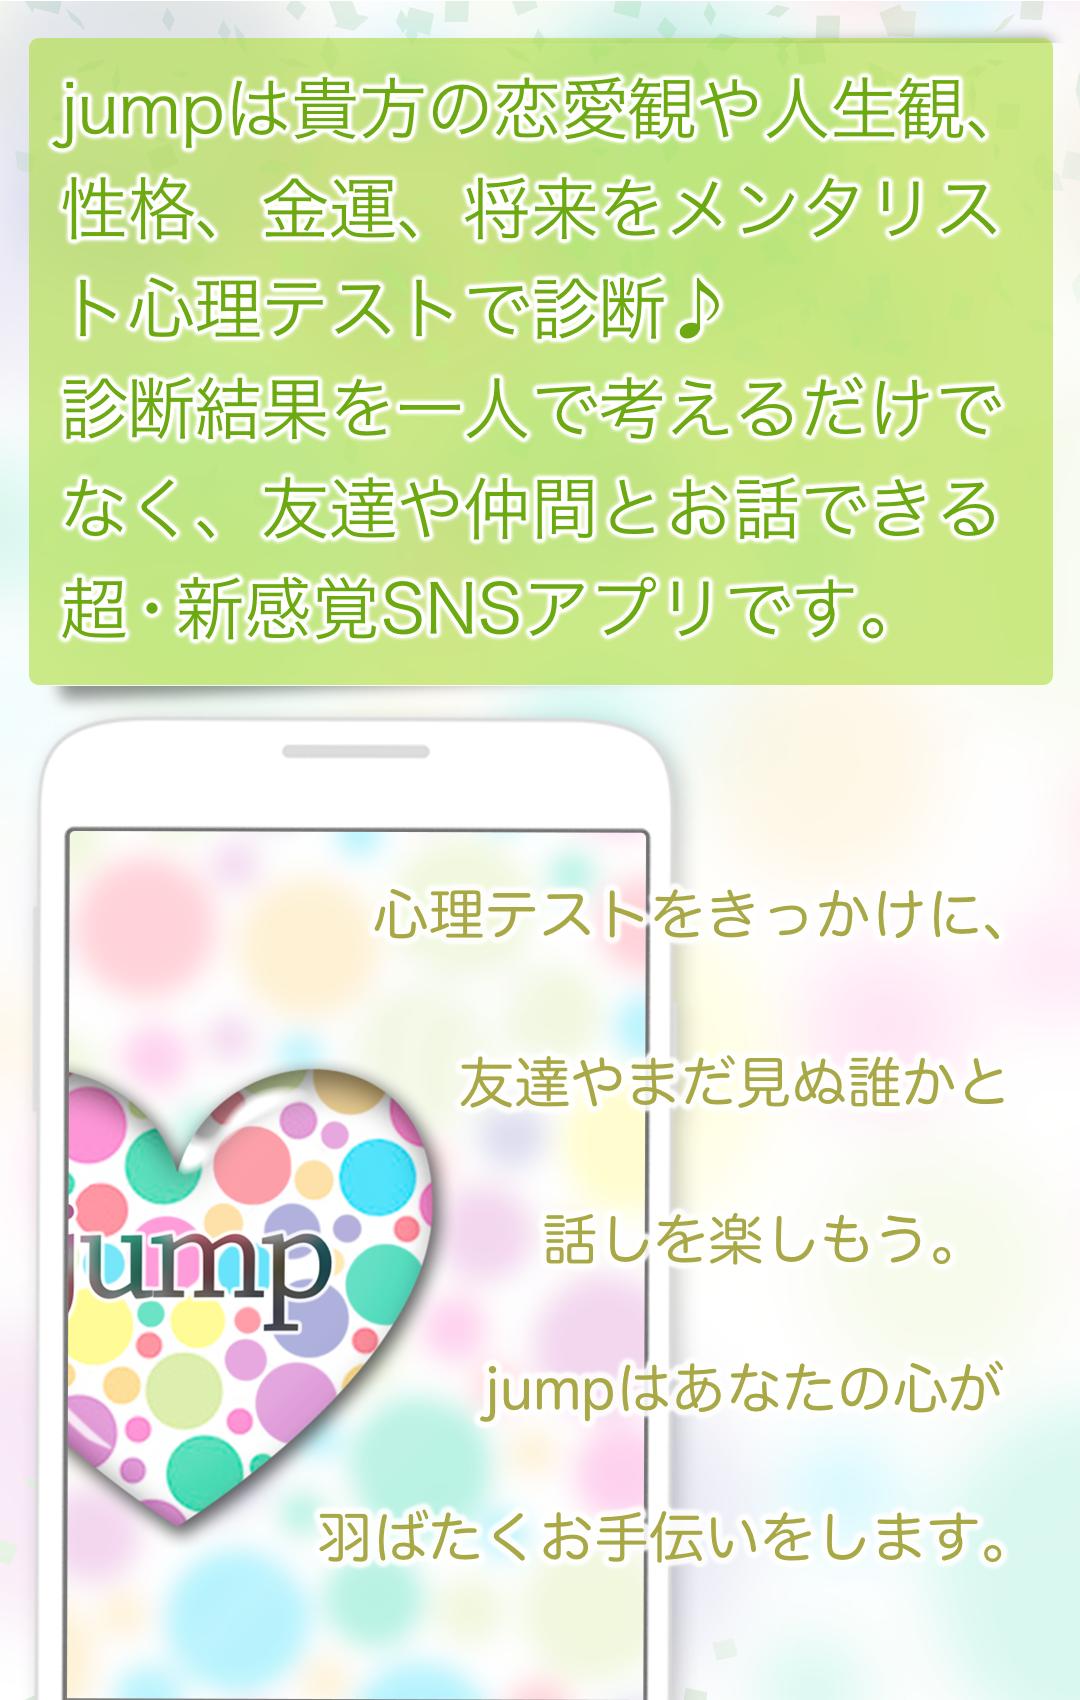 Jump ジャンプ 心理テスト 恋愛相談 診断 占いトーク For Android Apk Download